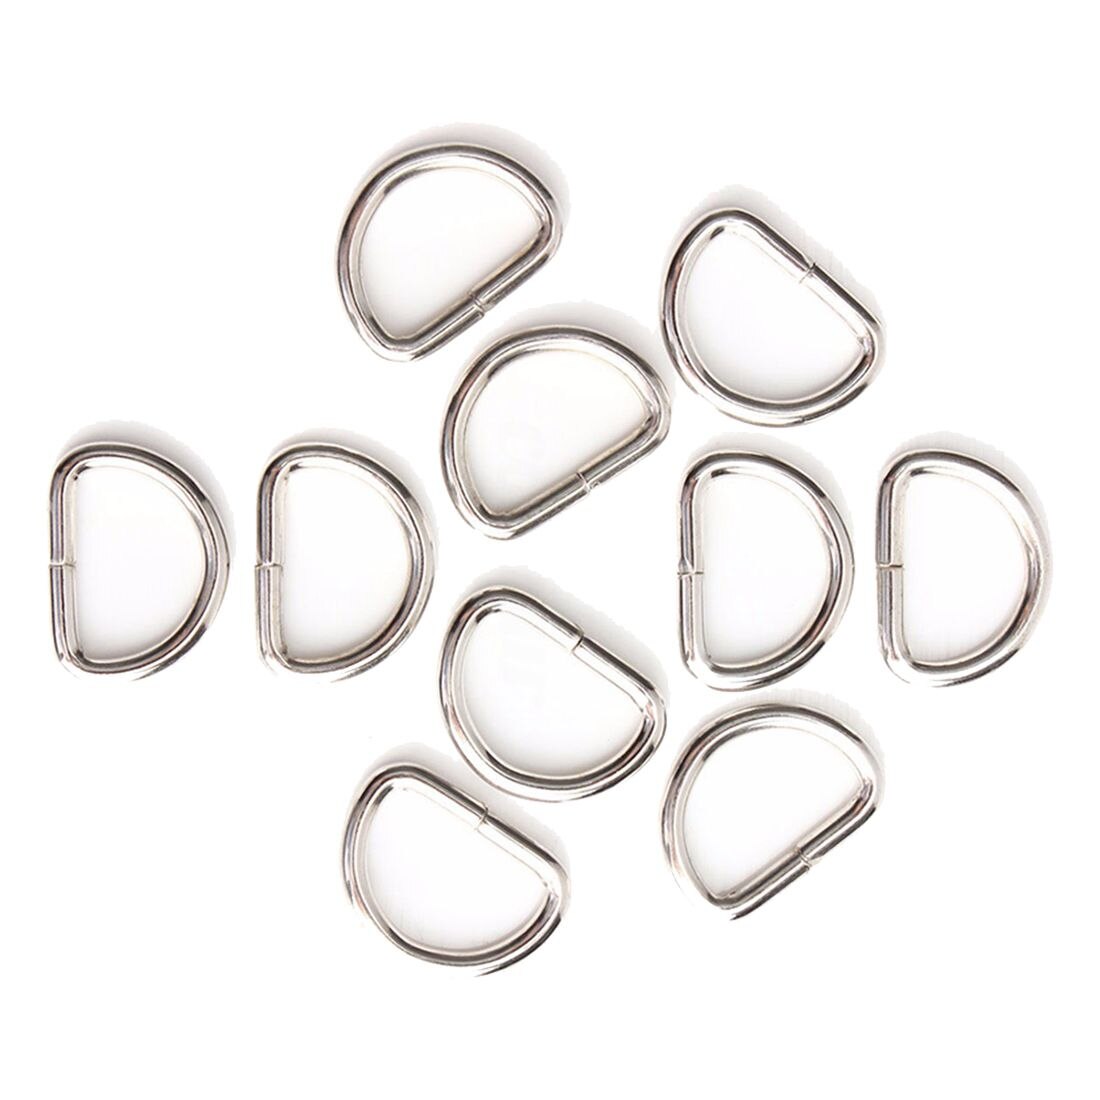 25mm Silver Metal D-shaped Ring D-Ring Metal Ring for bag - ebowsos